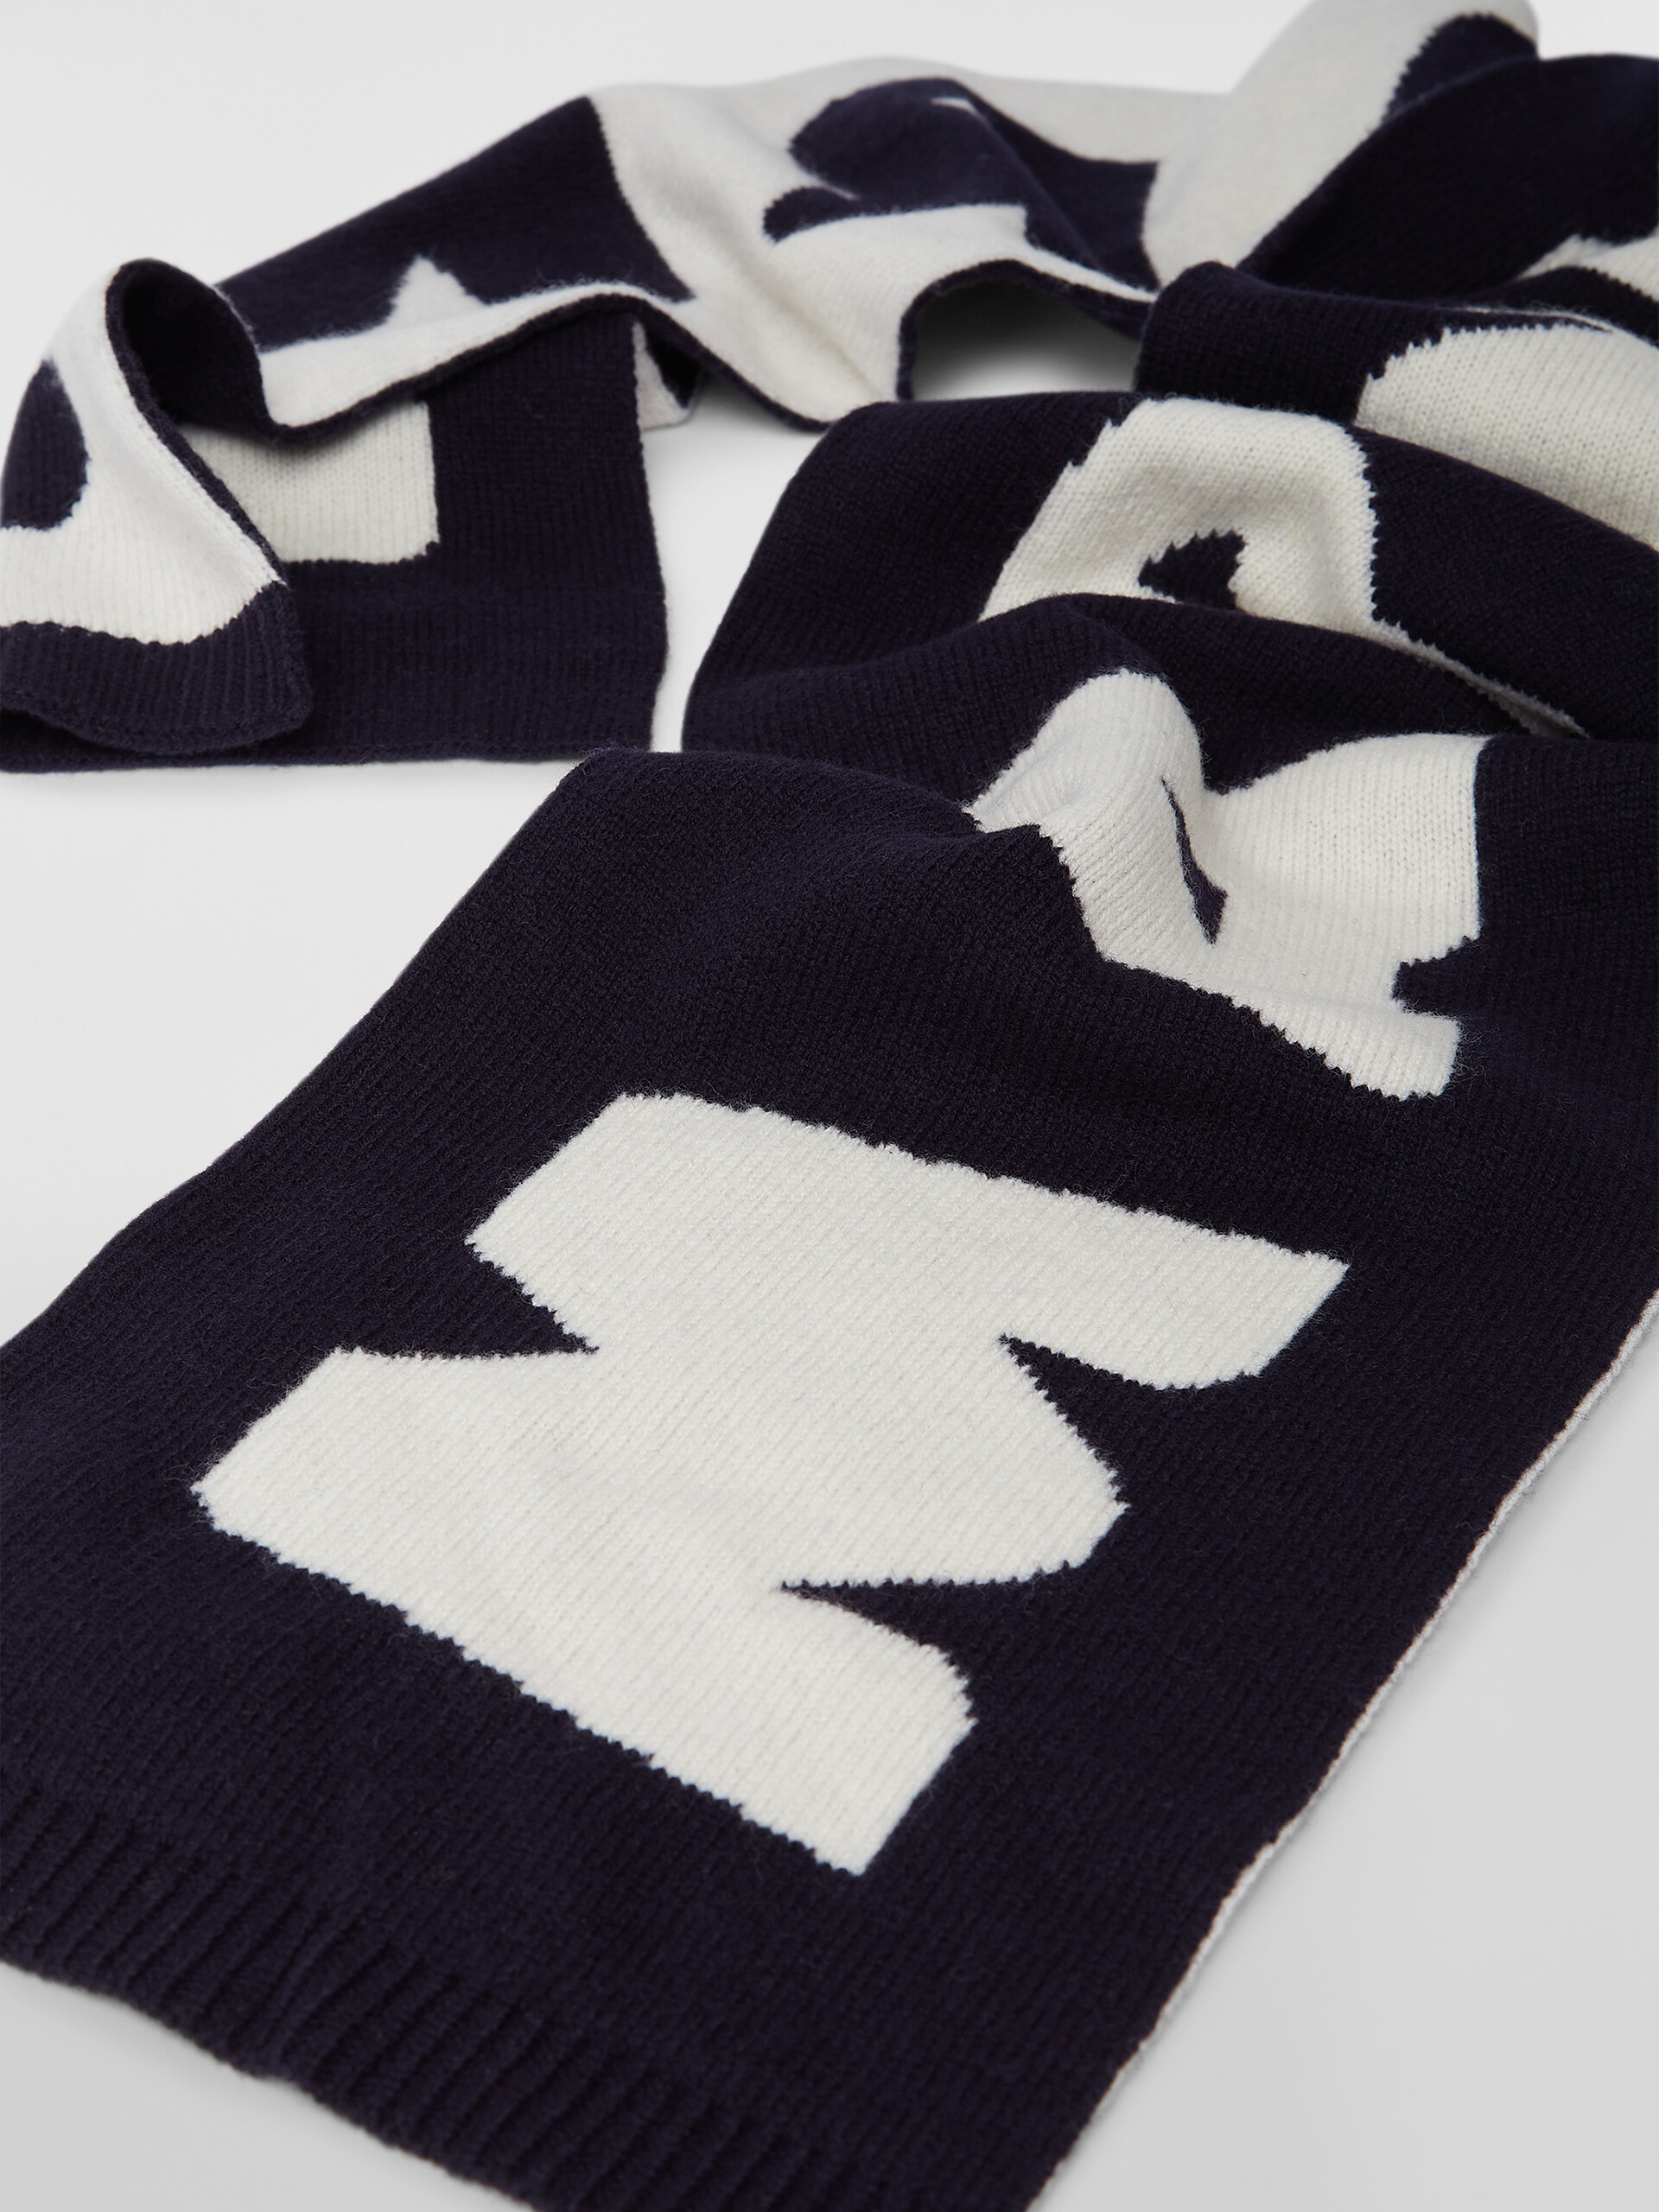 WOOL SCARF WITH MAXI LOGO - Scarves - Image 3